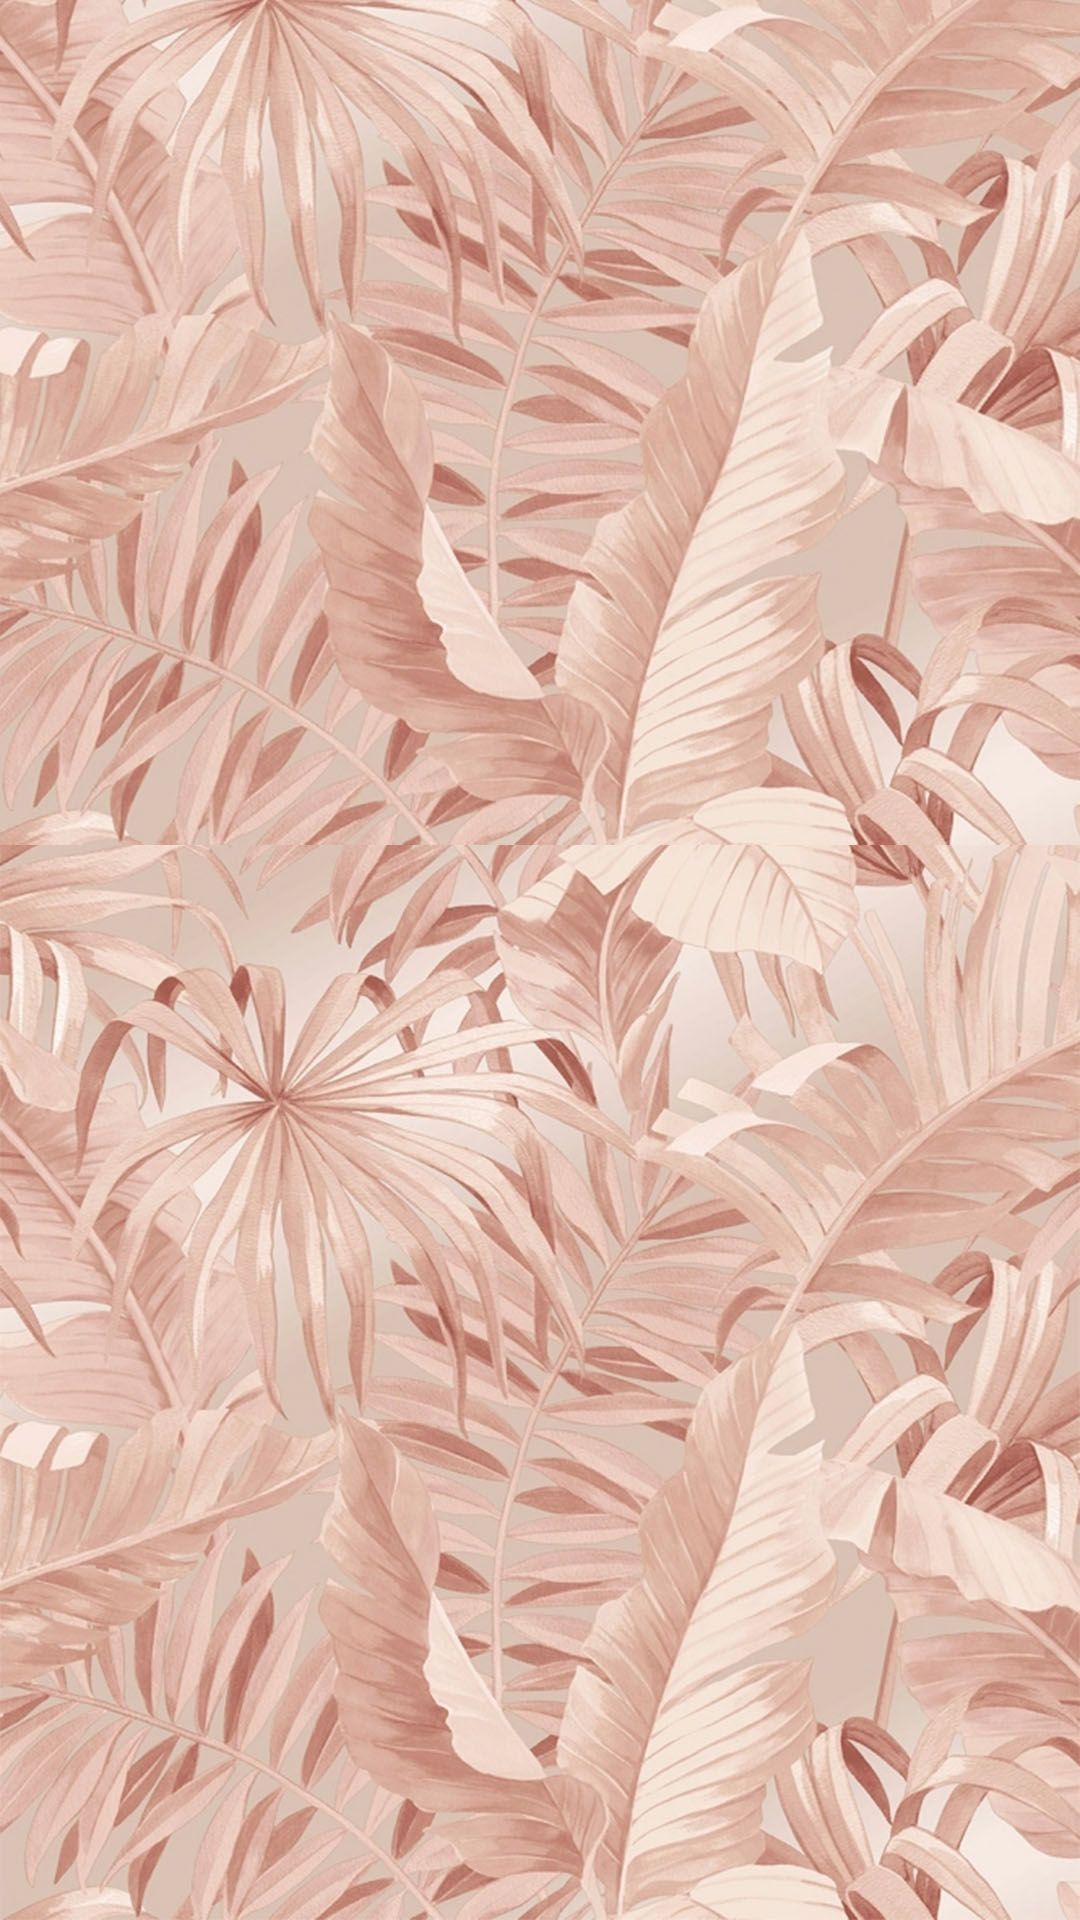 A pink and white tropical wallpaper with palm leaves - Blush